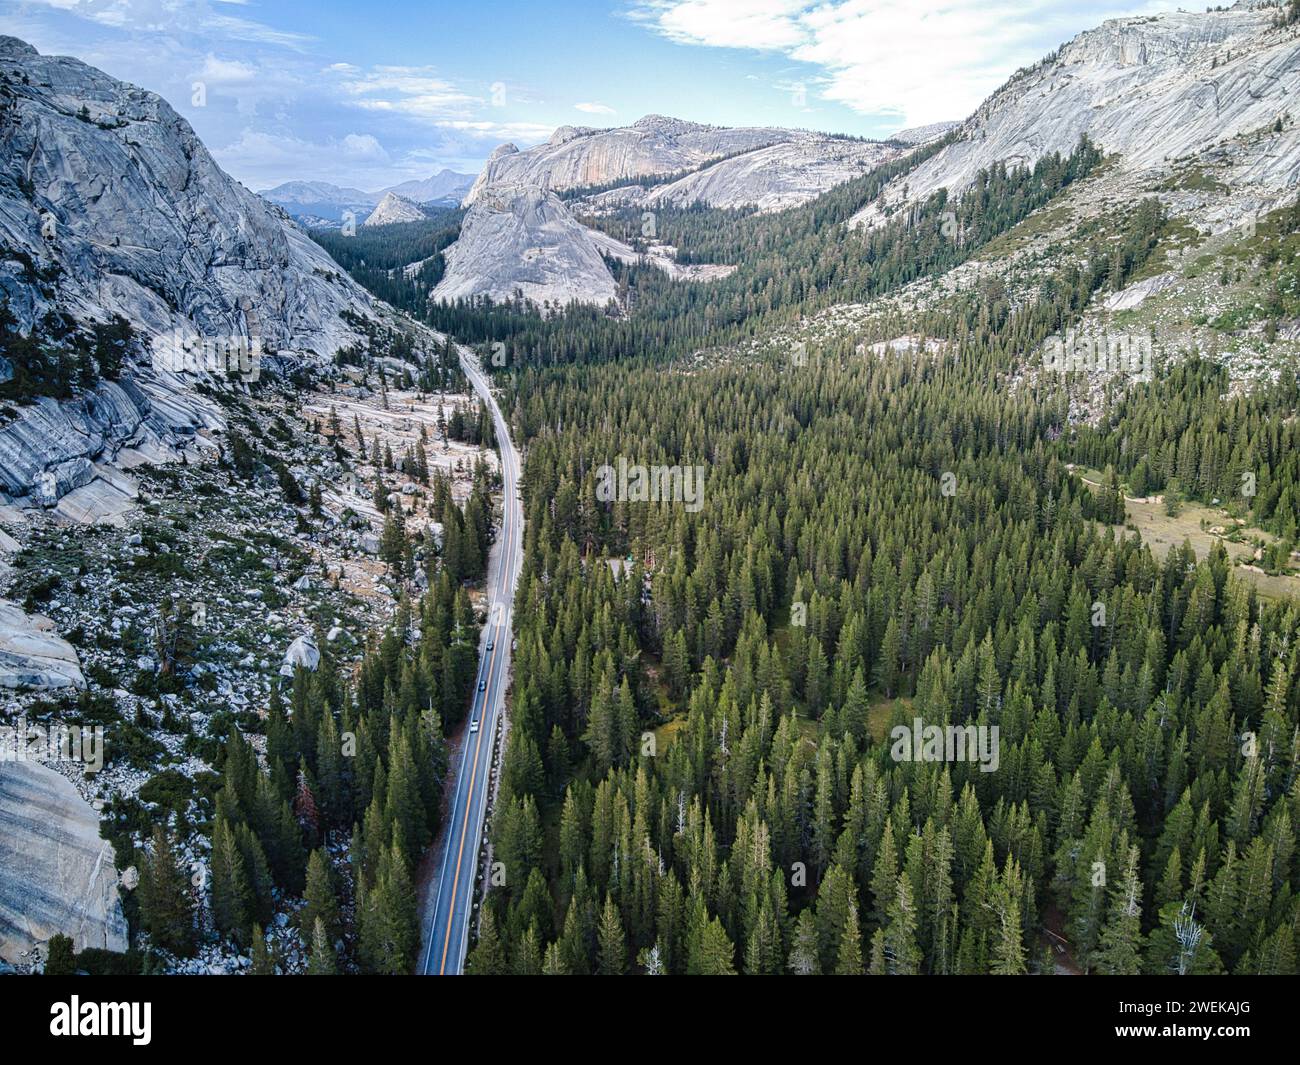 A stunning mountainous landscape featuring a scenic road nestled between two majestic rocky peaks Stock Photo